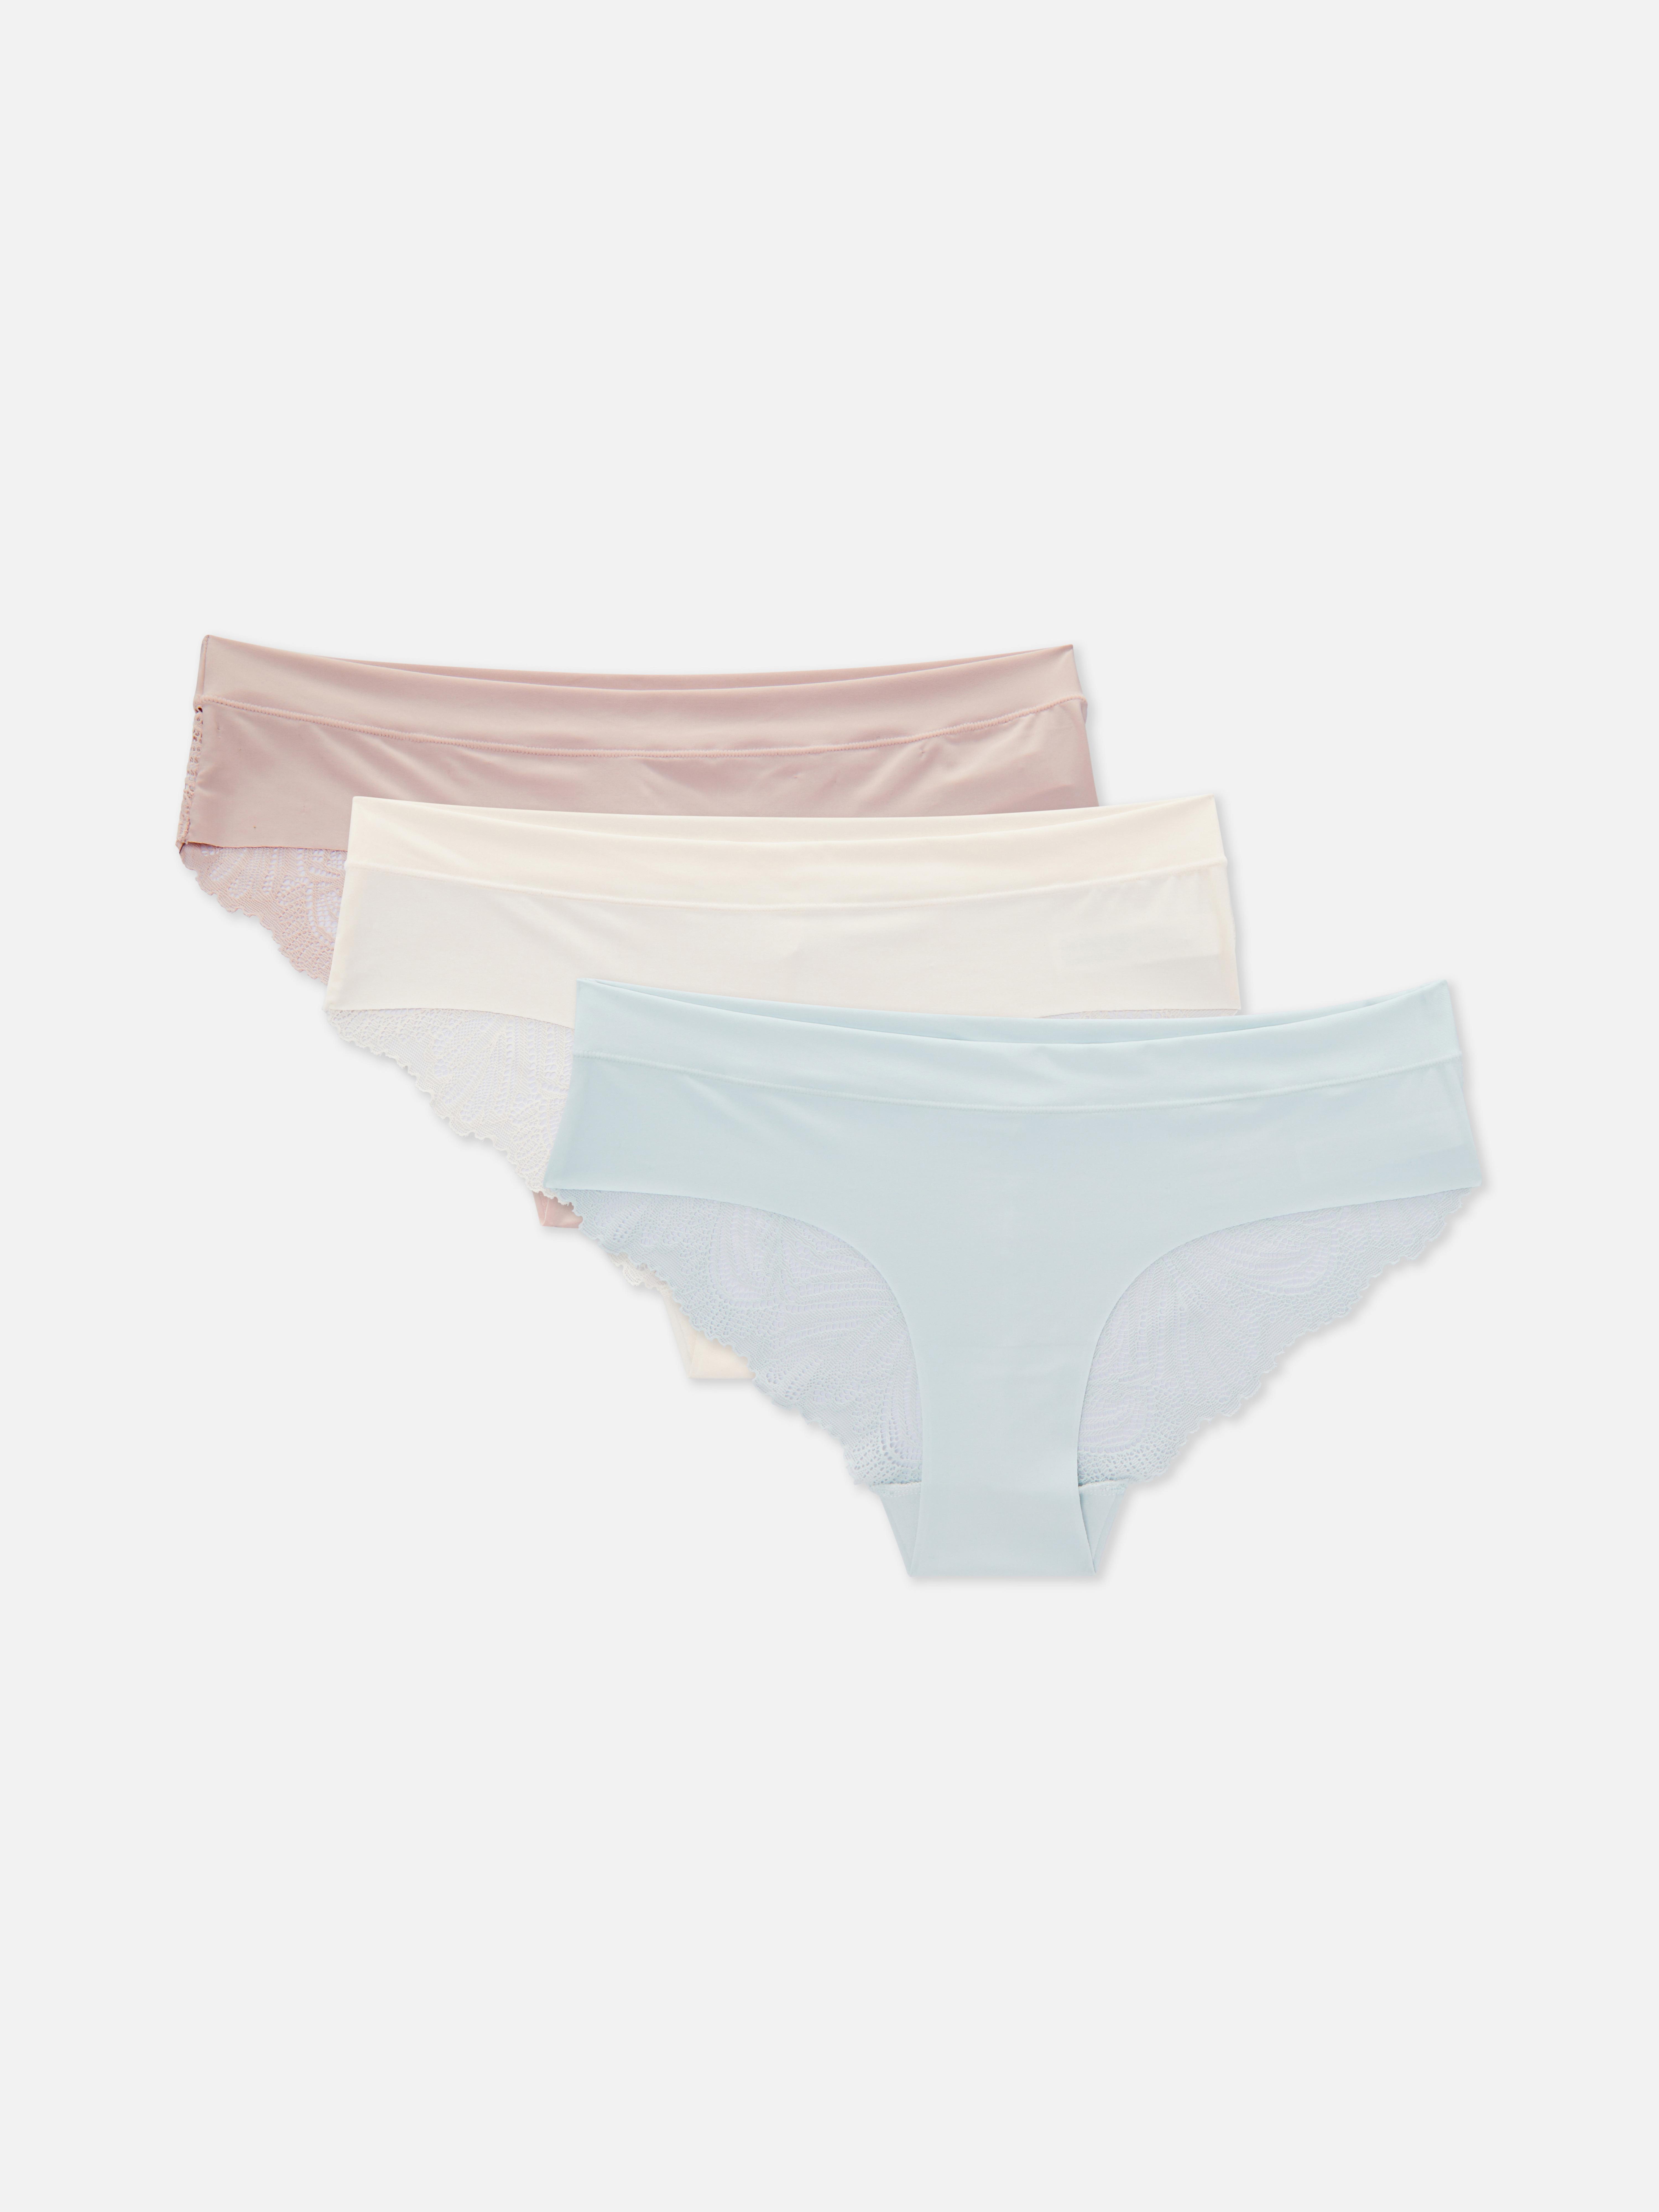 3-pack invisible Brazilian briefs - Light pink/Grey marl/White